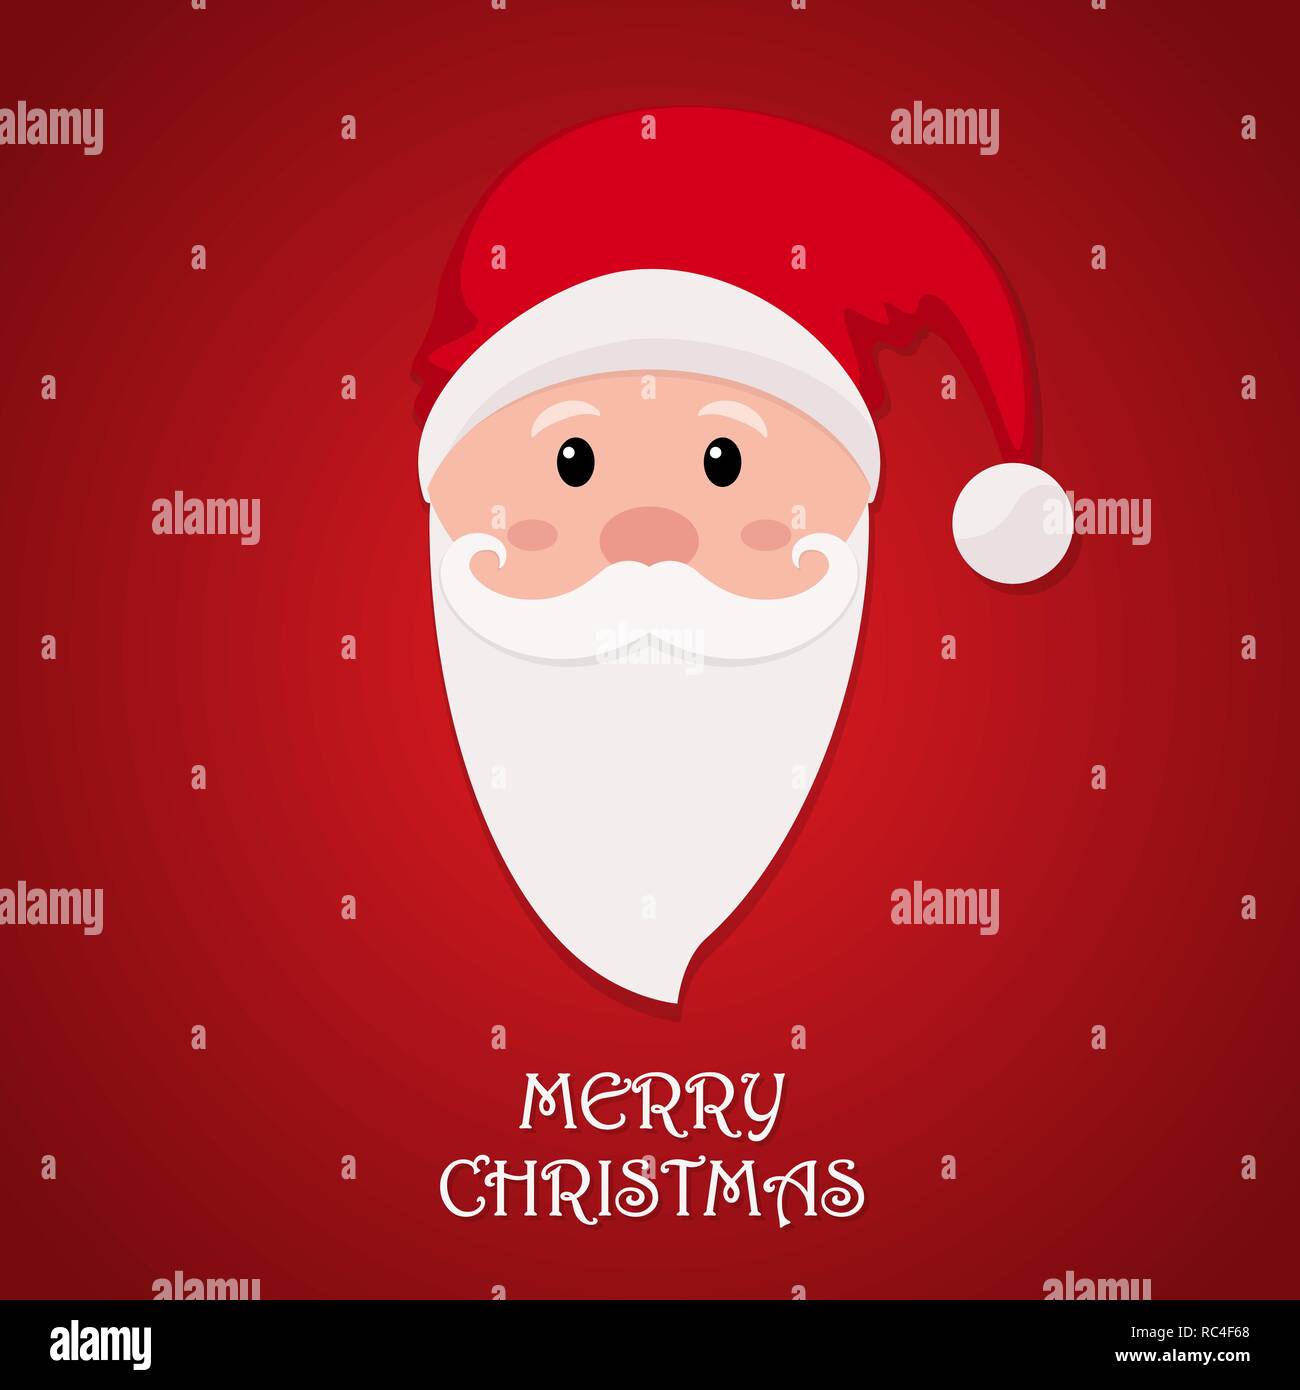 The face of Santa Claus with a beard and mustache on red background. Vector illustration. Merry Christmas icon. Stock Vector